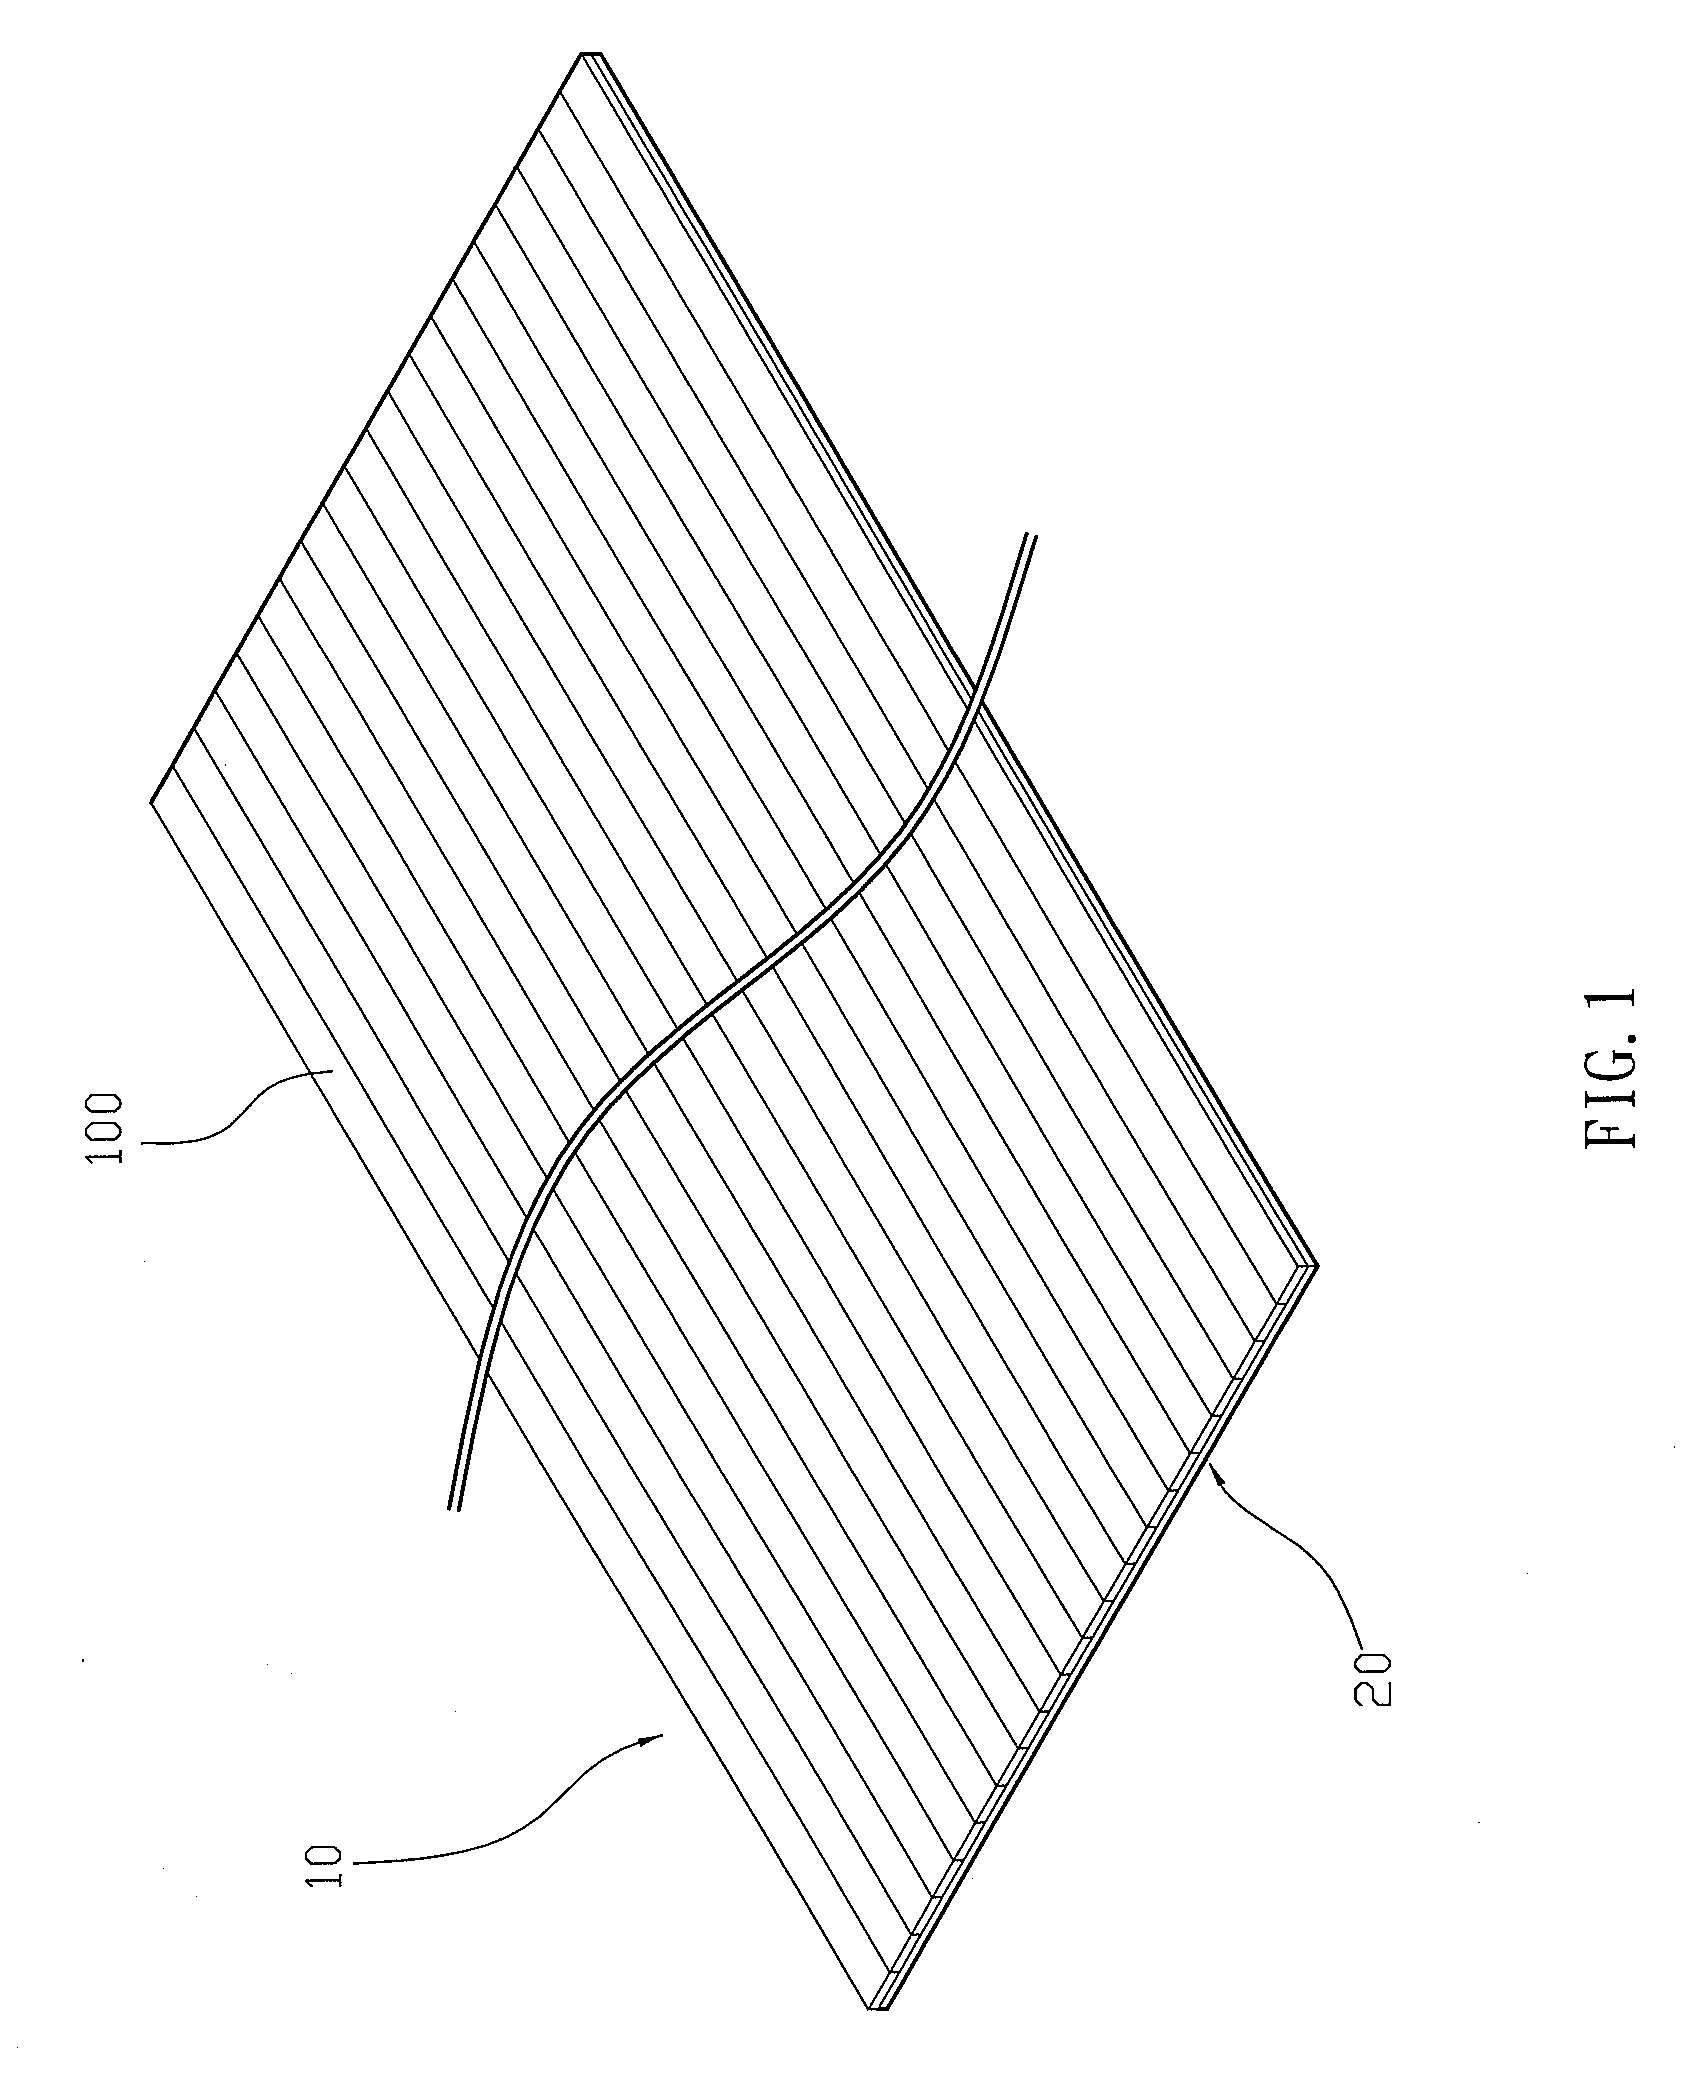 Pre-Dipping Carbon Fiber Cloth Structure